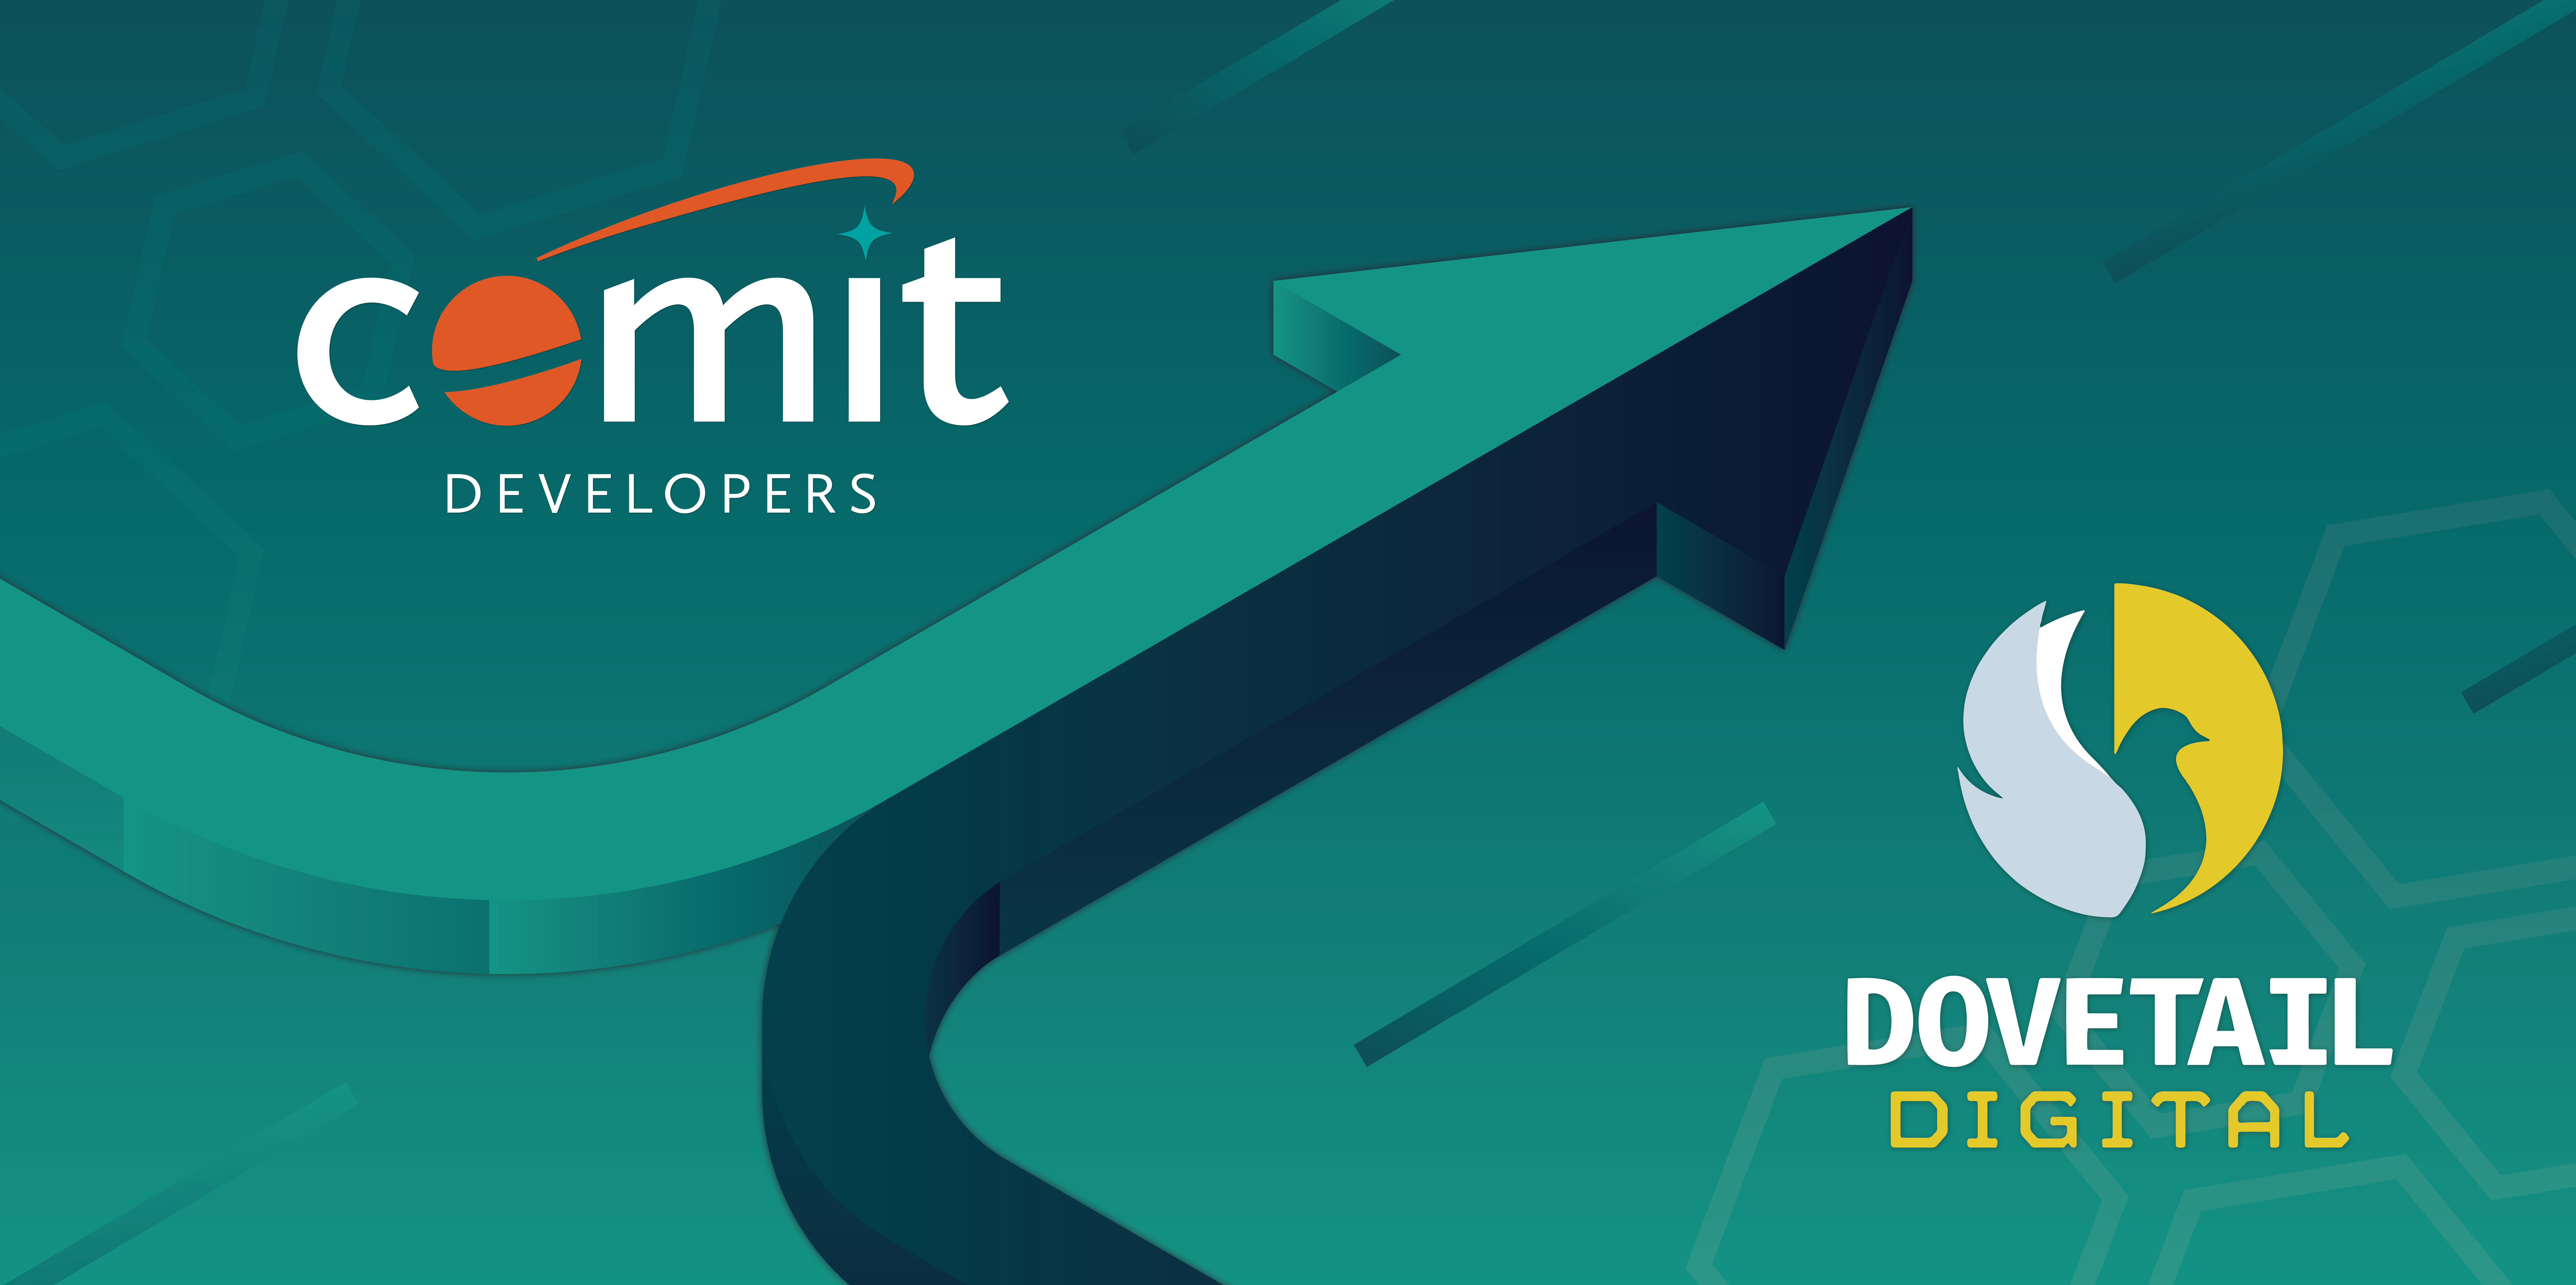 Illustration showing the Comit Developers and Dovetail Digital logos on either side of an arrow to indicate their new partnership